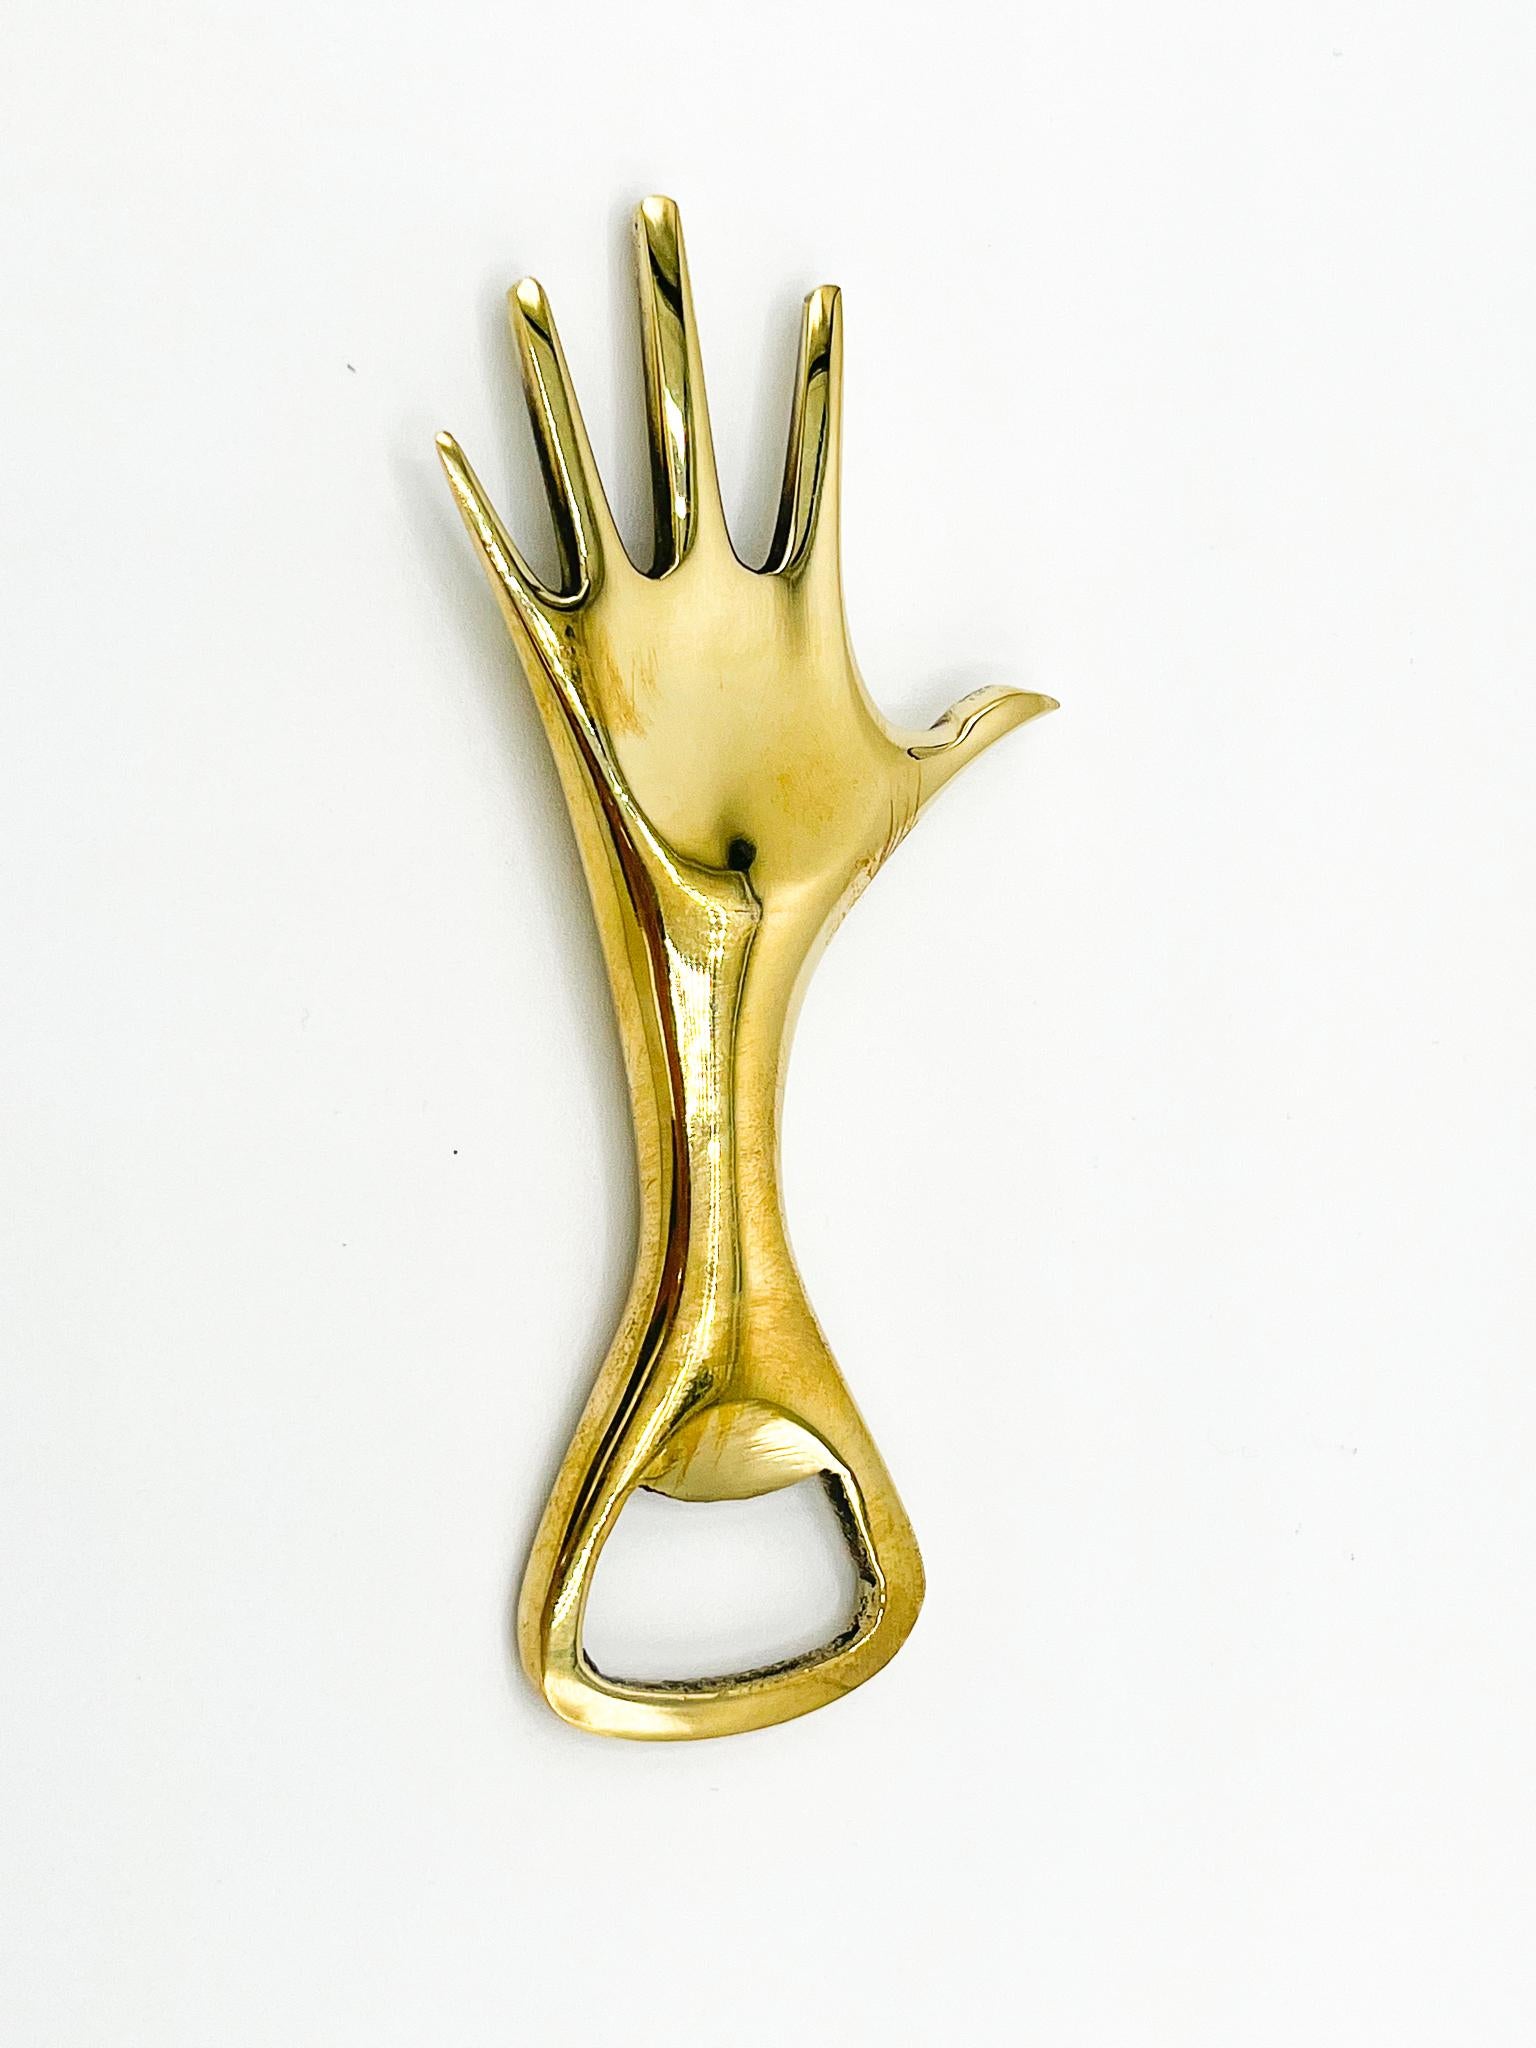 Contemporary Carl Aubock Polished Brass Hand Bottle Opener #4224 For Sale